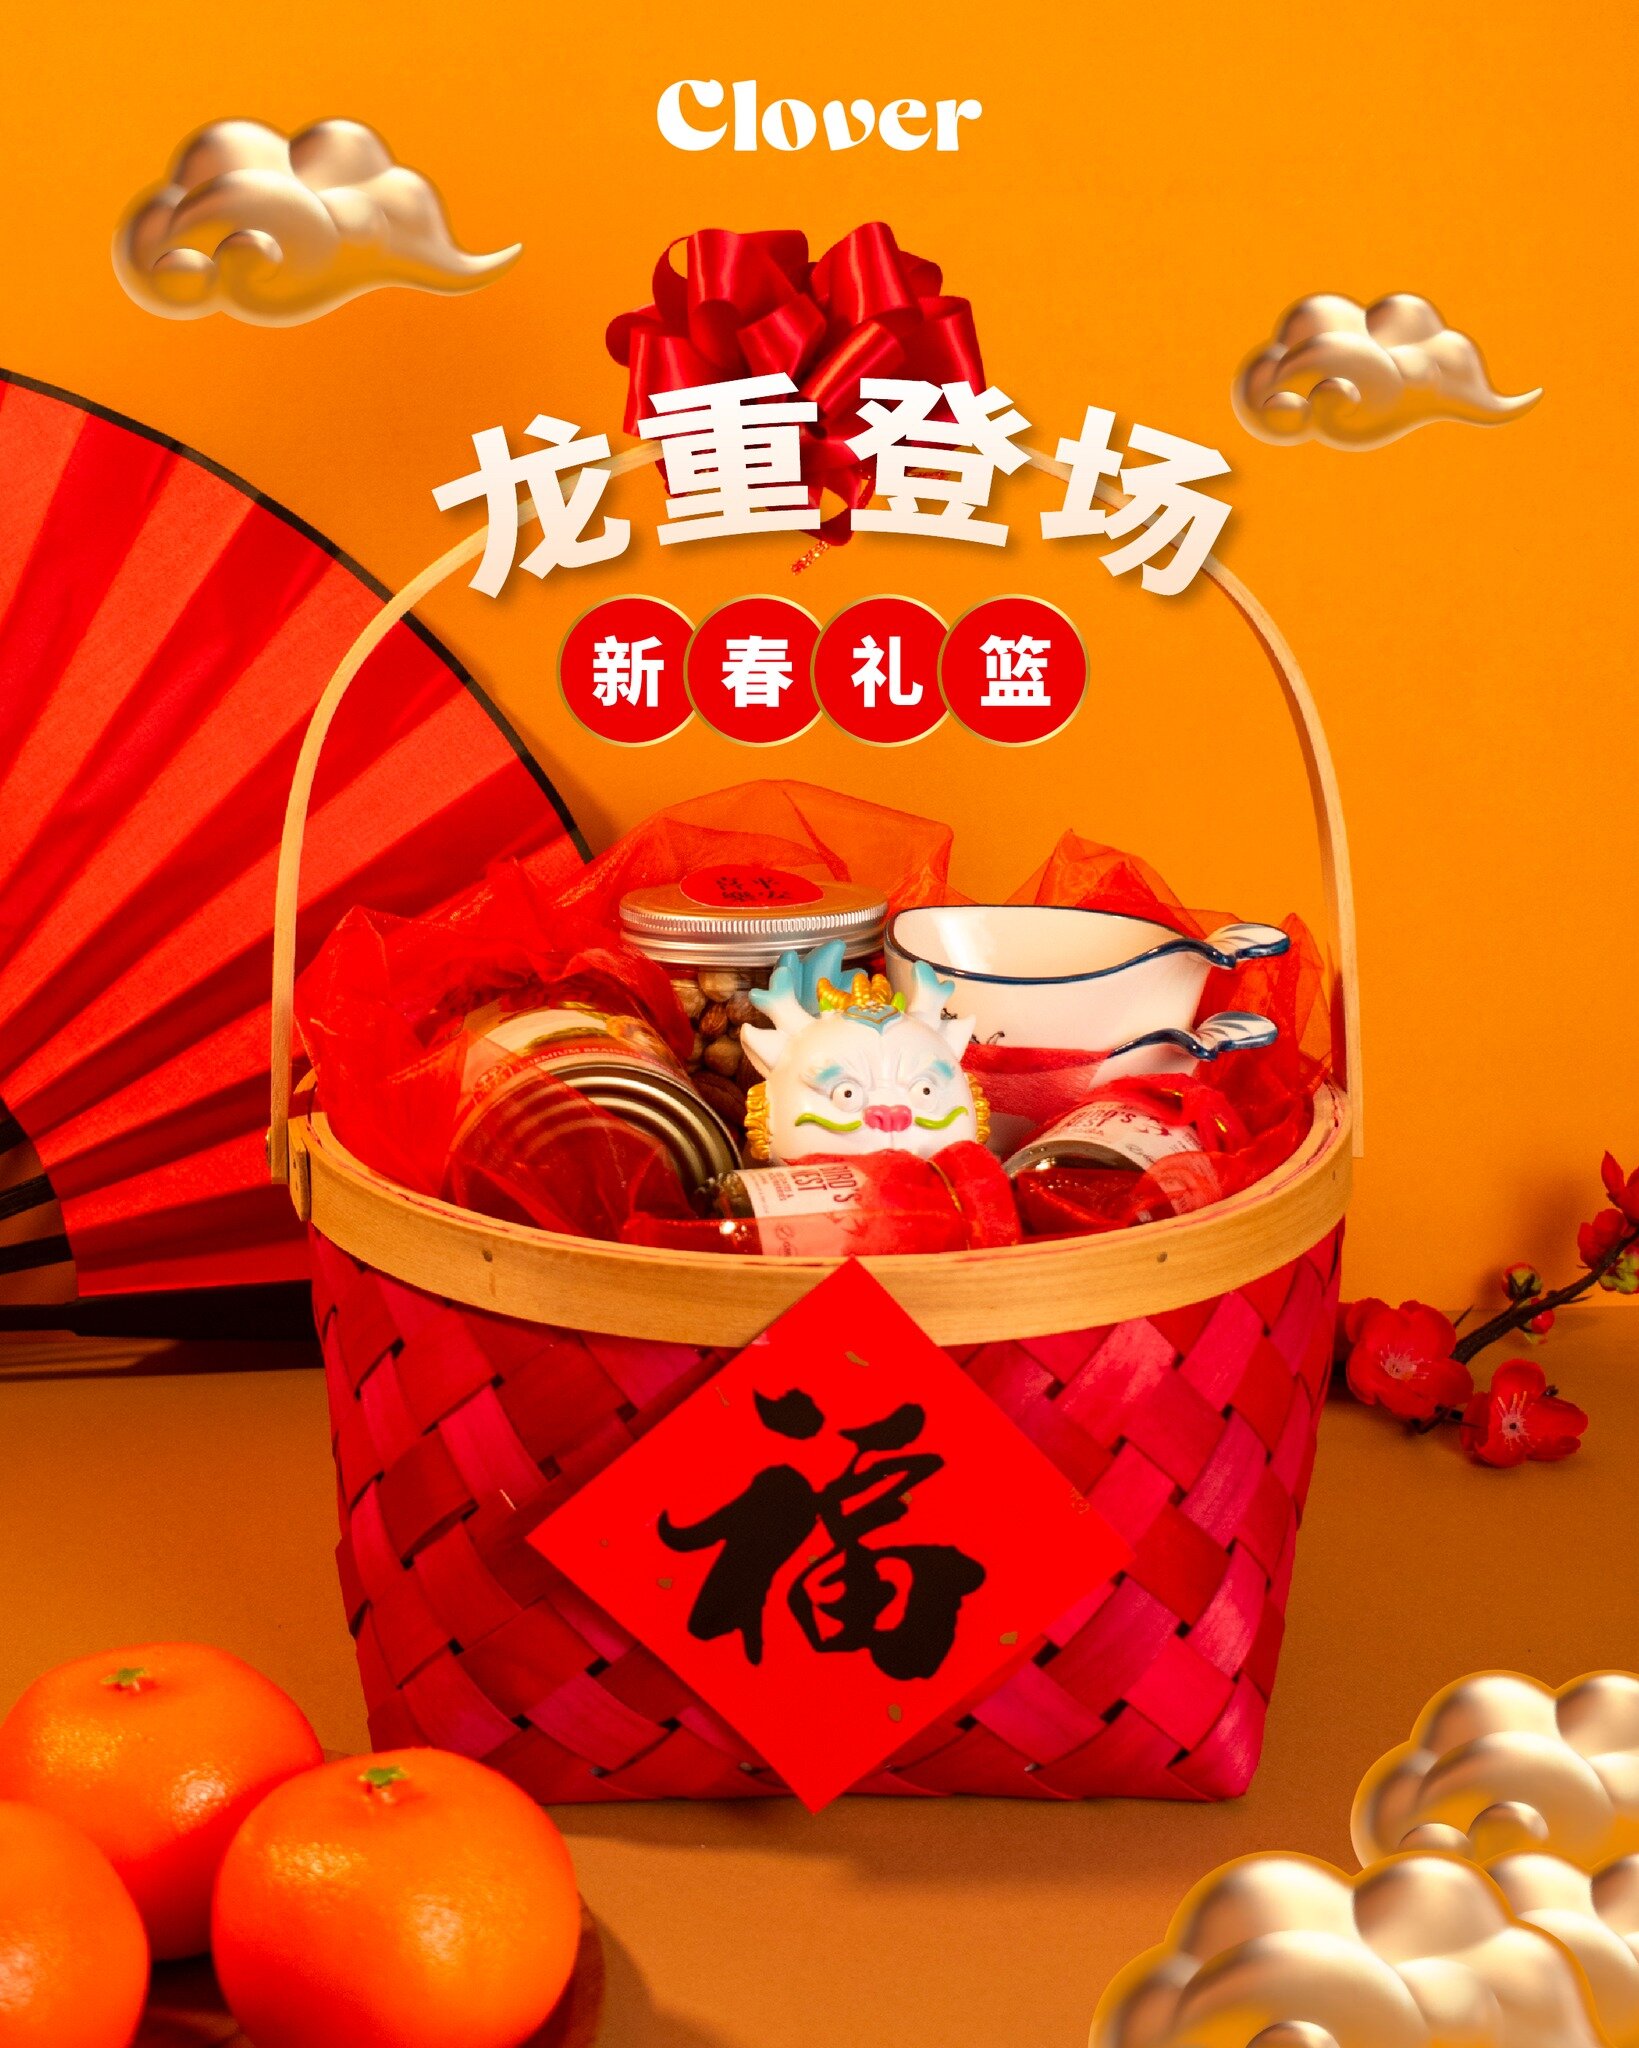 It's the Year of the Dragon! Allow us to present our special CNY Hamper: 龙重登场!

🐉𝐃𝐫𝐚𝐠𝐨𝐧'𝐬 𝐓𝐫𝐢𝐮𝐦𝐩𝐡 𝐅𝐞𝐚𝐬𝐭 𝐁𝐚𝐬𝐤𝐞𝐭 ✨
🧧 New Year Bamboo Basket x1
🧧 Creative fish-shaped bowl x2
🧧 Braised abalone x1
🧧 Bird's nest with red date